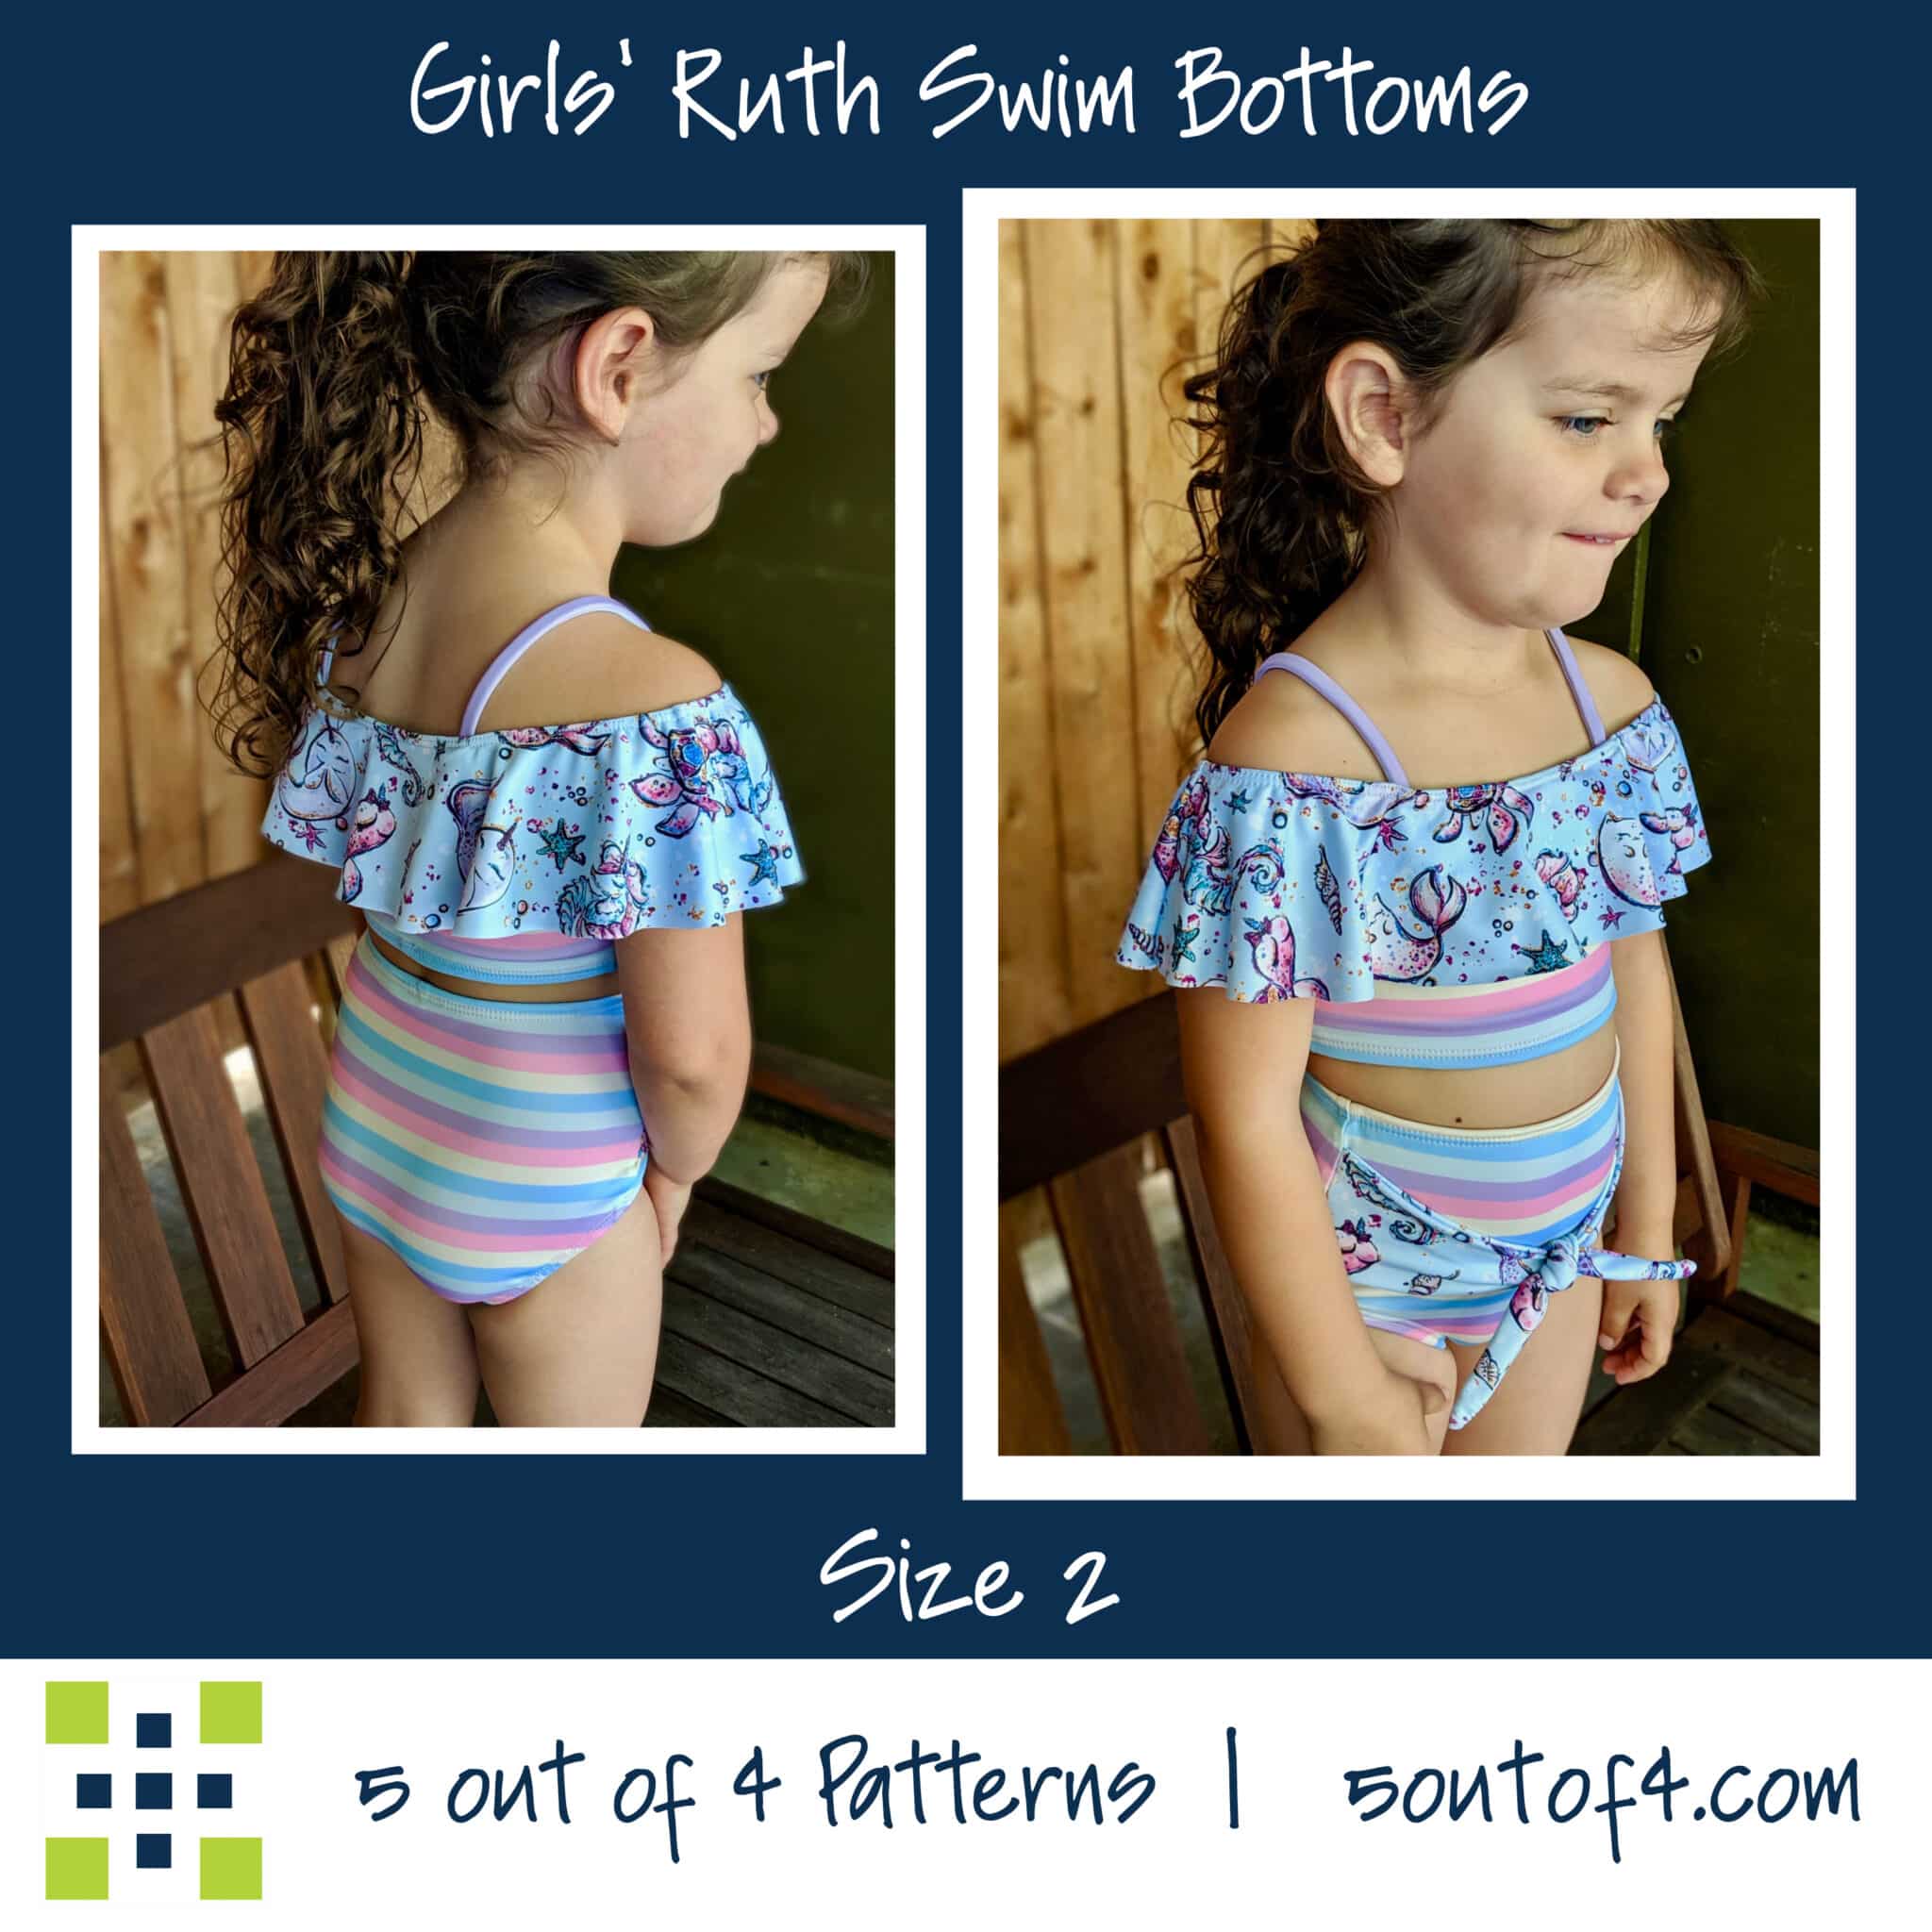 Girls' Ruth Swim Bottoms - 5 out of 4 Patterns